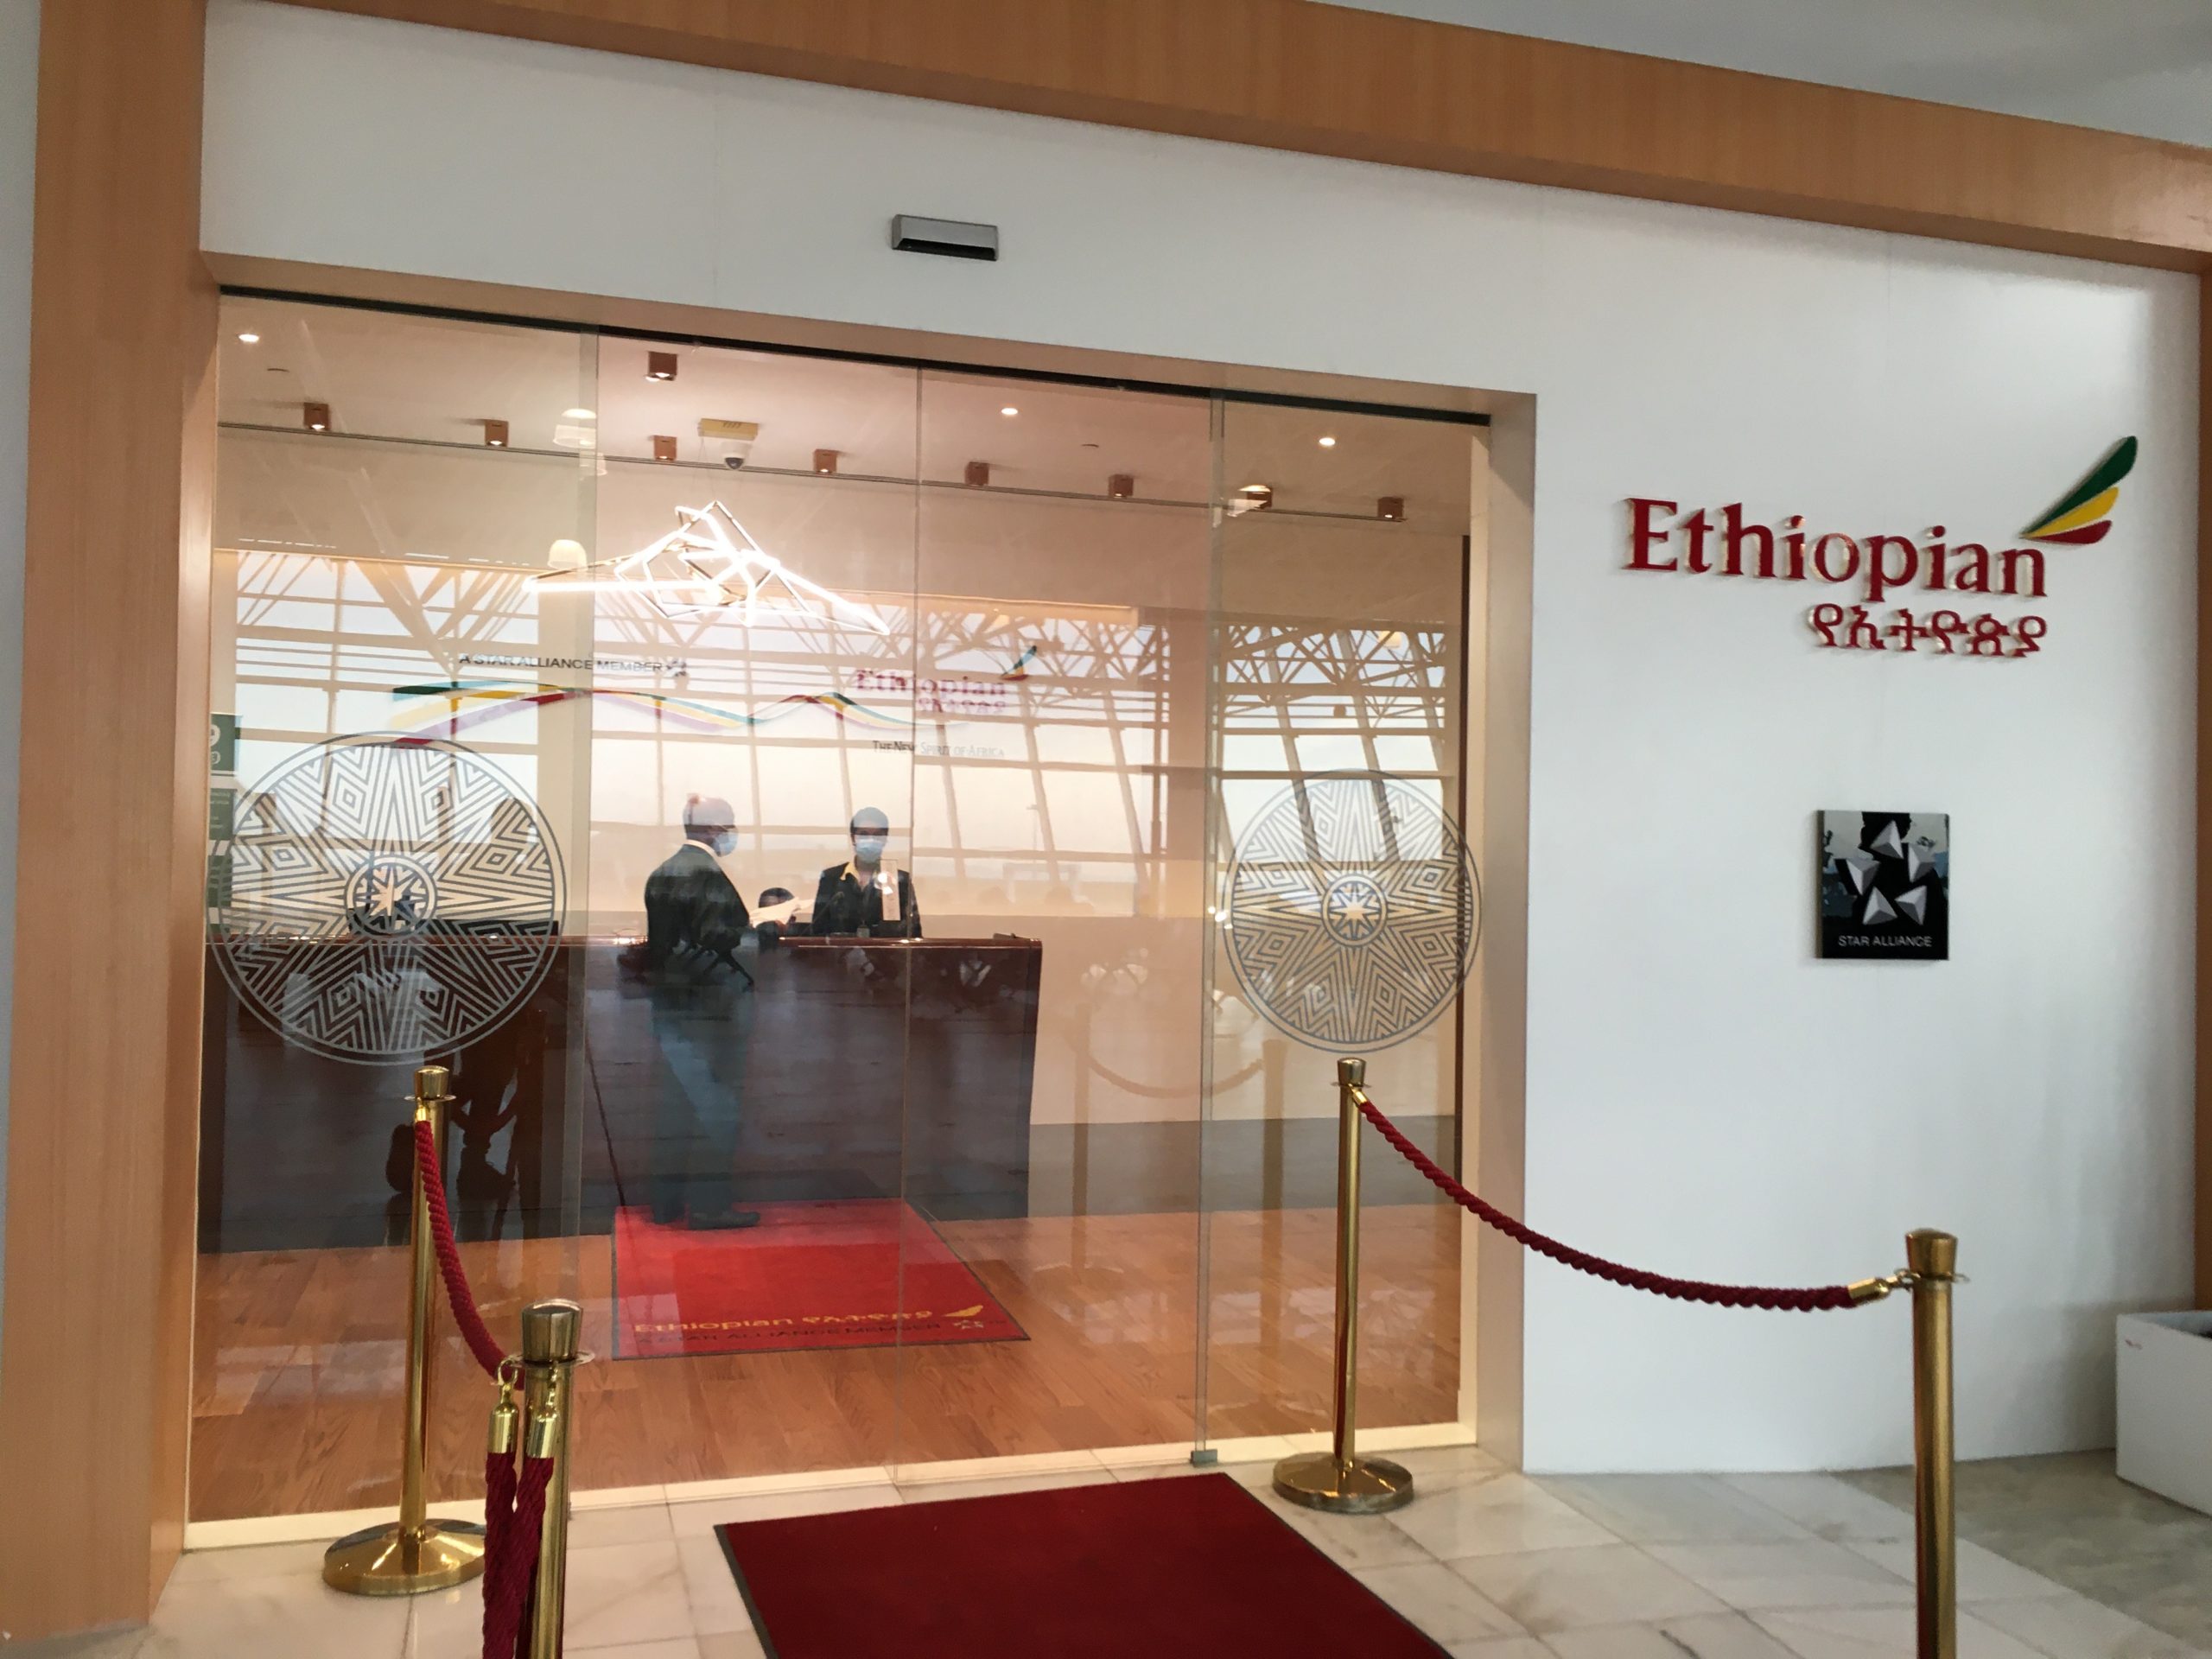 Ethiopian Airlines New Lounge Review at ADD